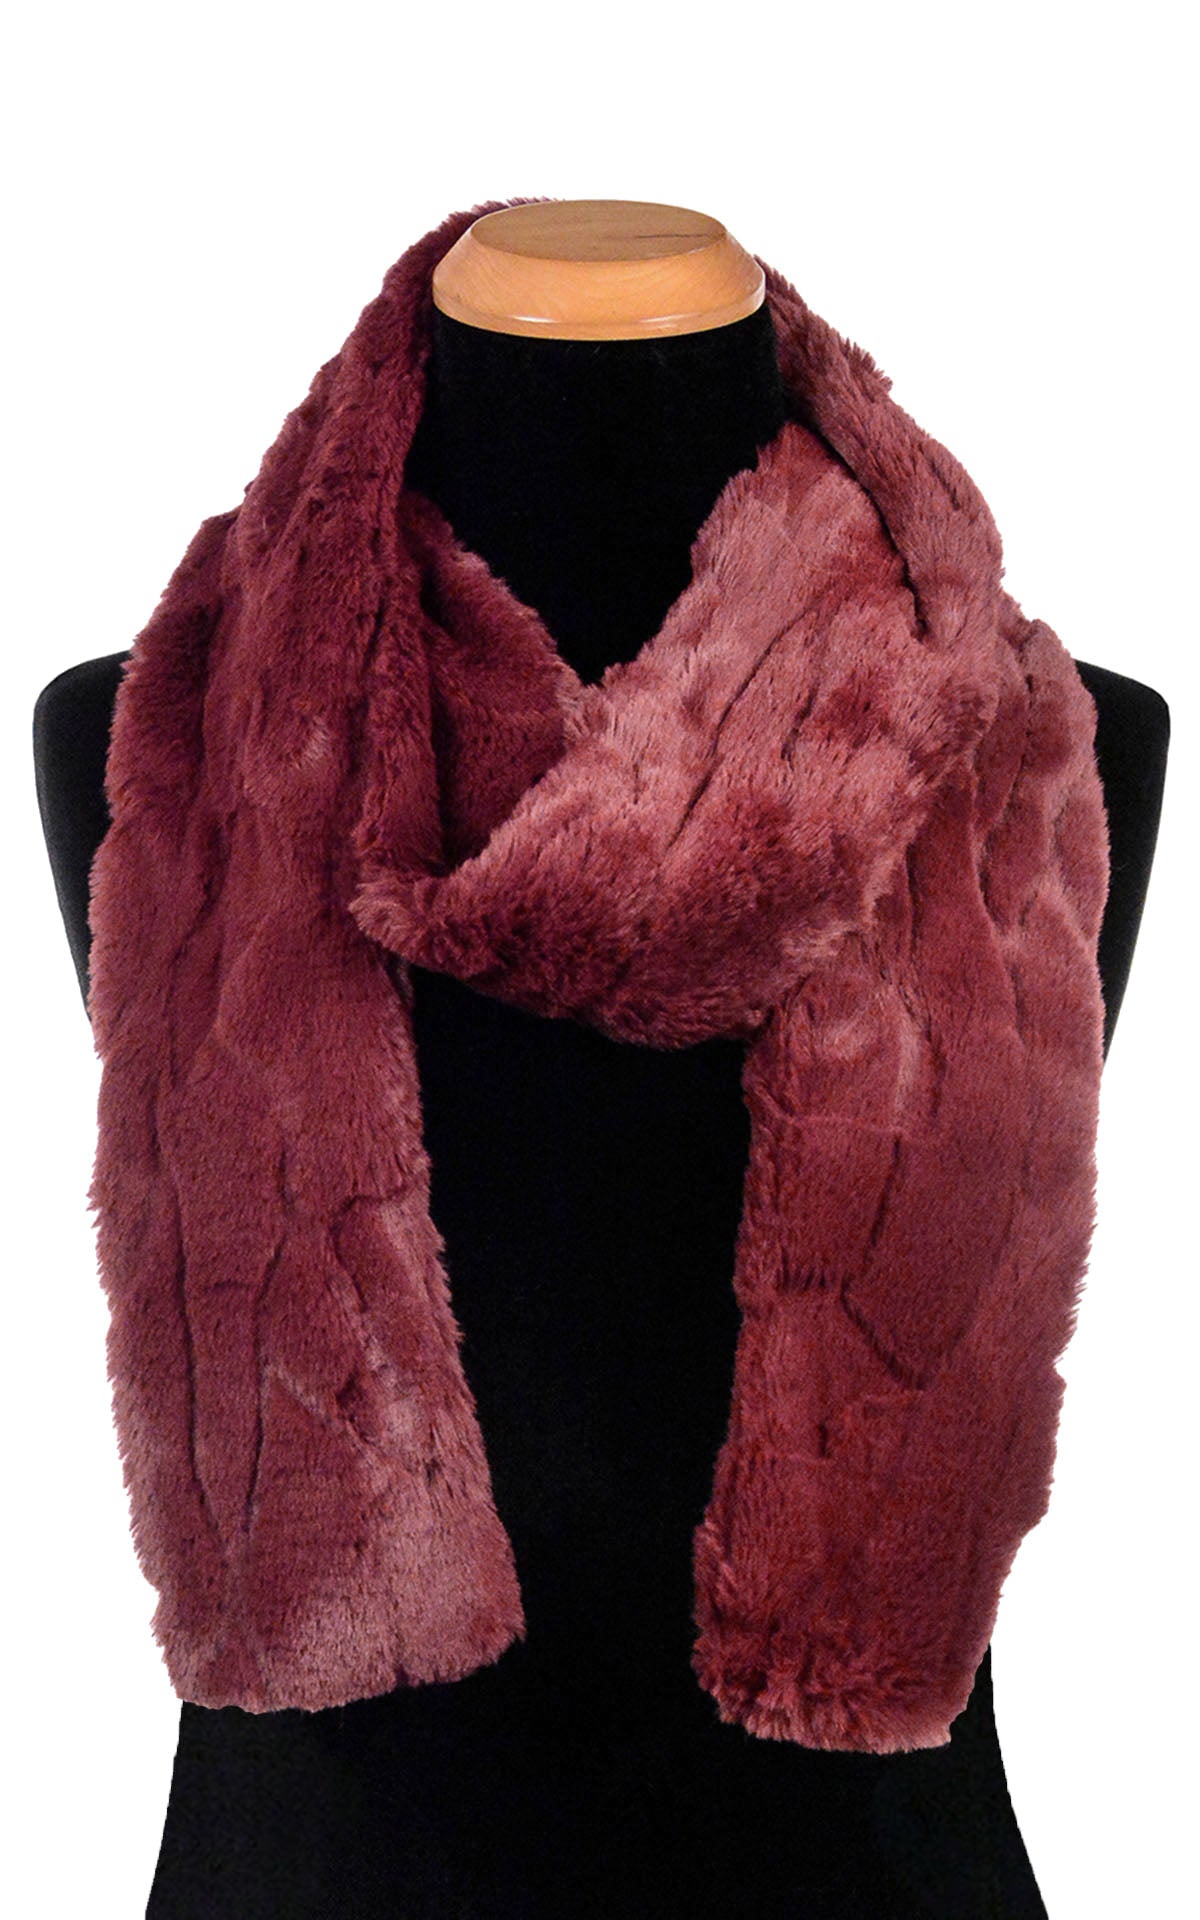 Men's Classic Scarf | Cranberry Creek Faux Fur | Handmade in the USA by Pandemonium Seattle